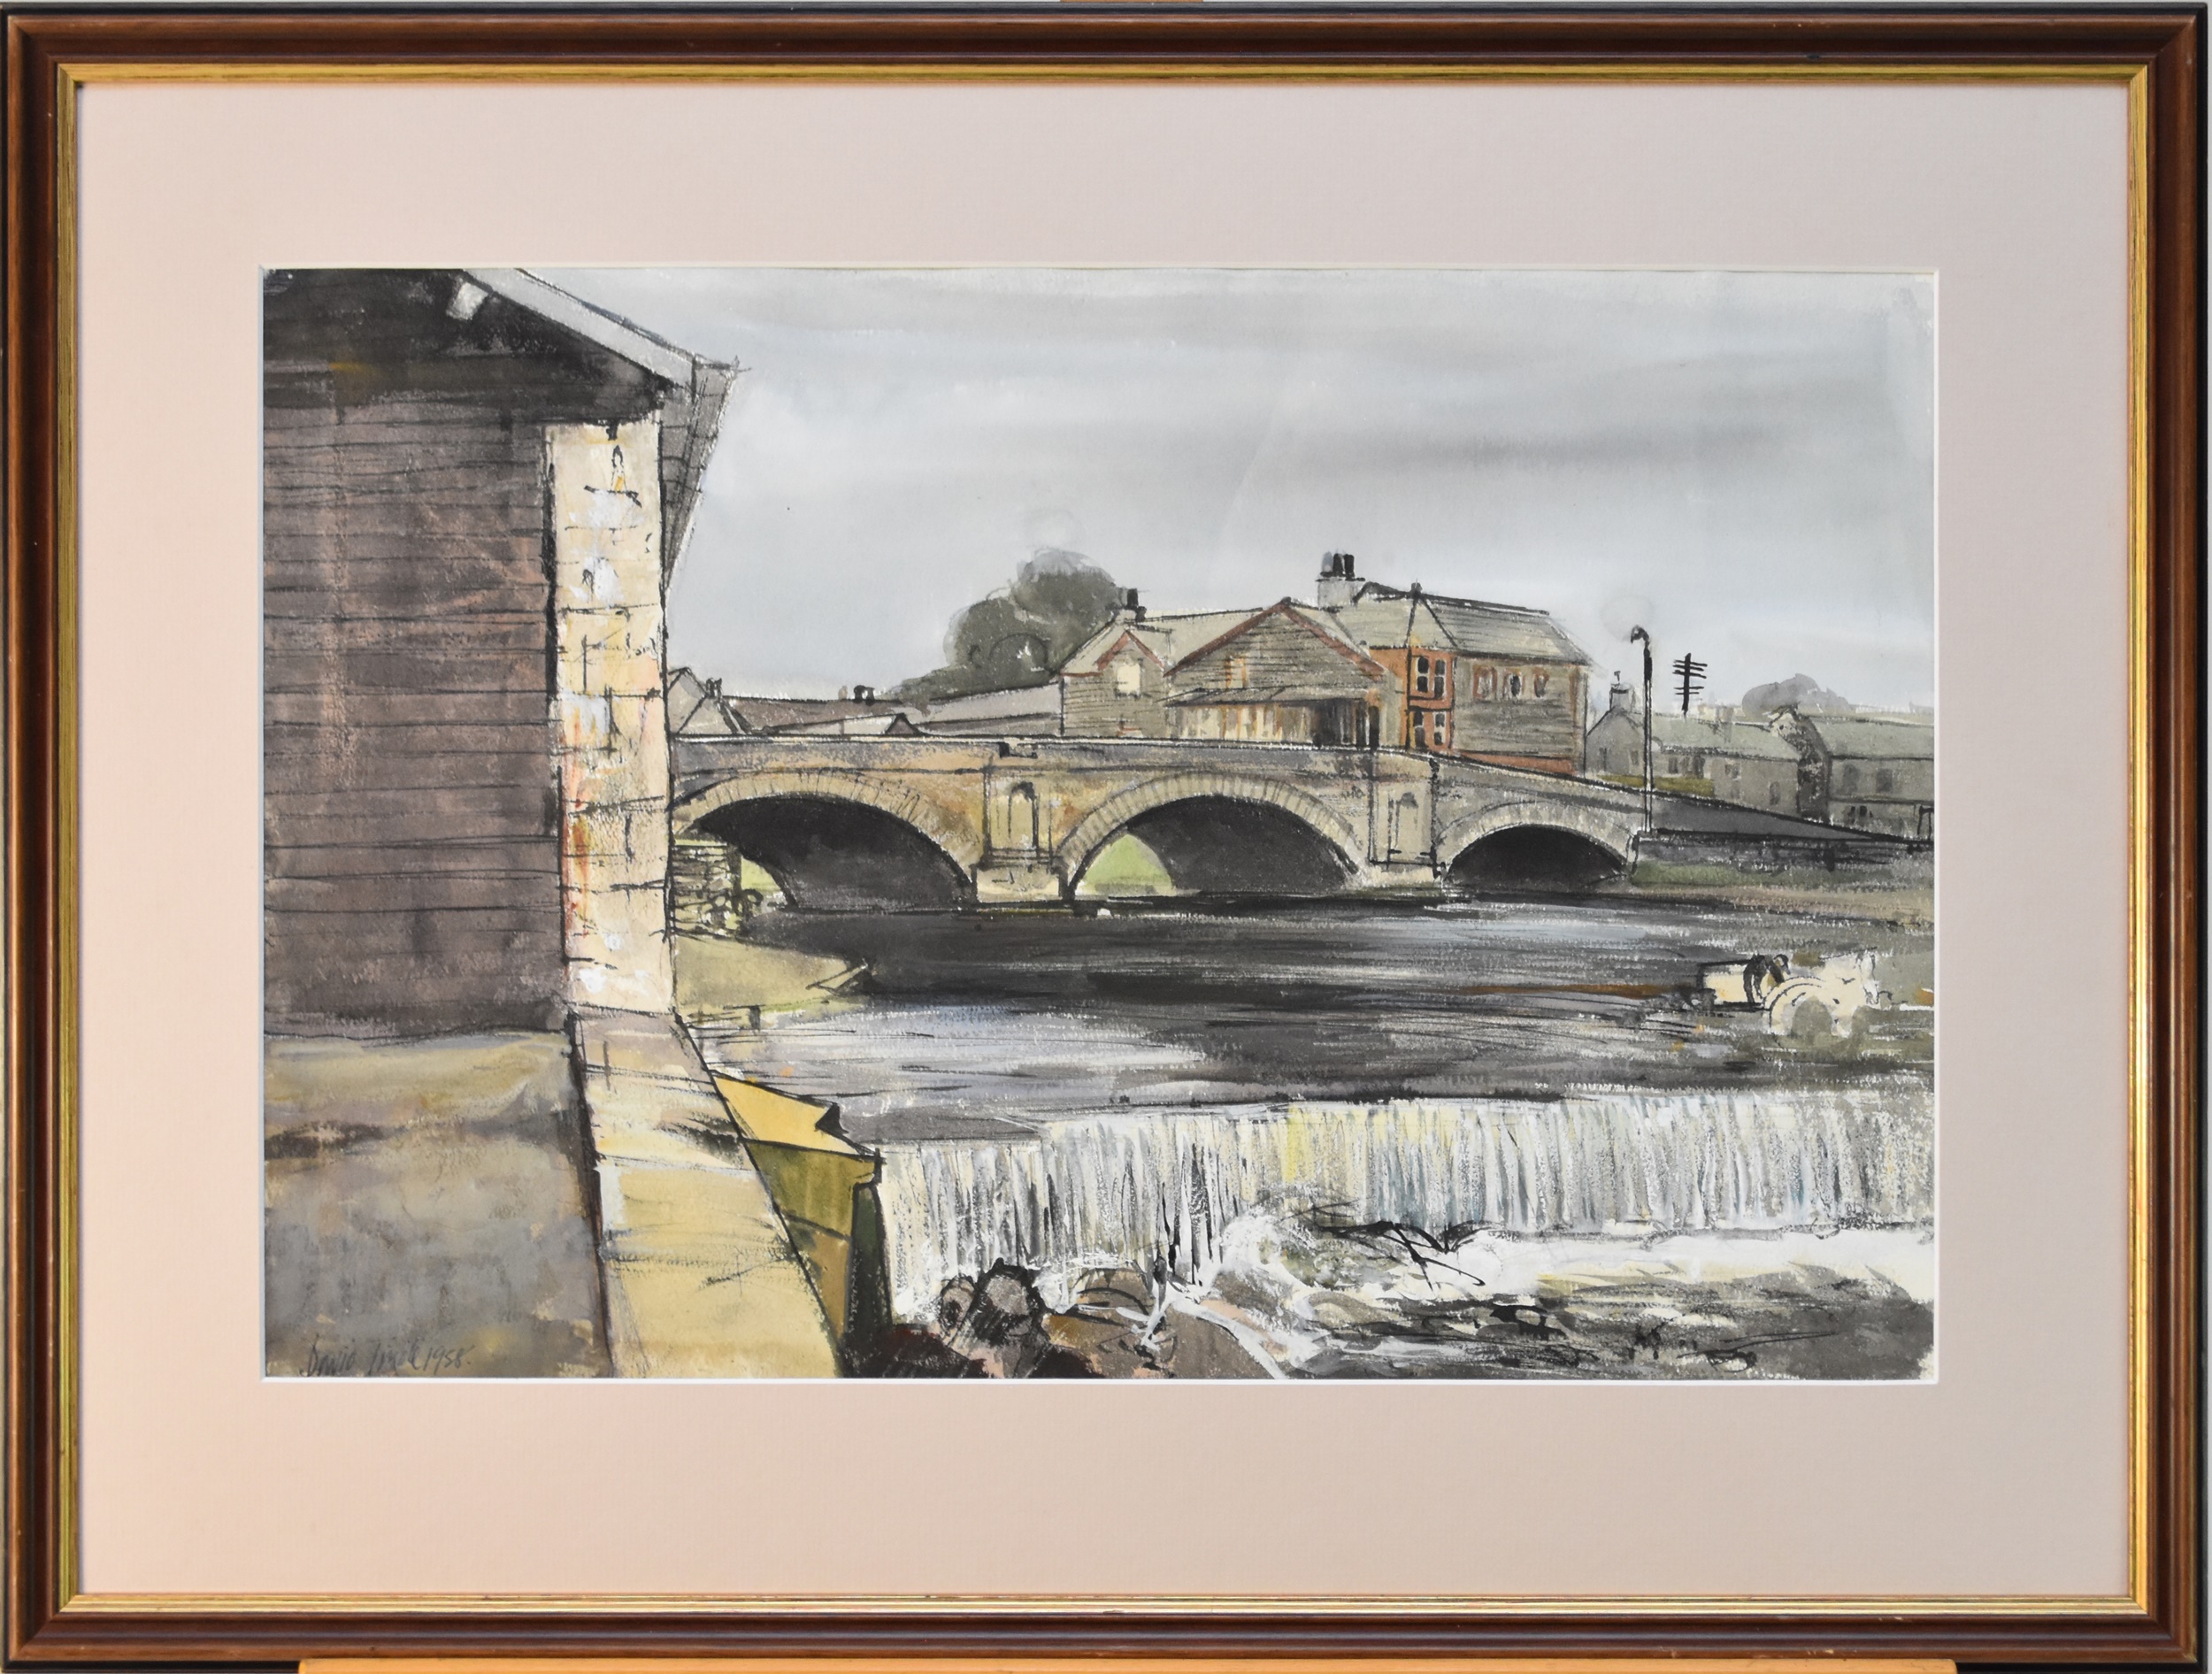 David Tindle (British b.1958) Kendal Bridge, signed and dated 1958 lower left, watercolour, - Image 2 of 3